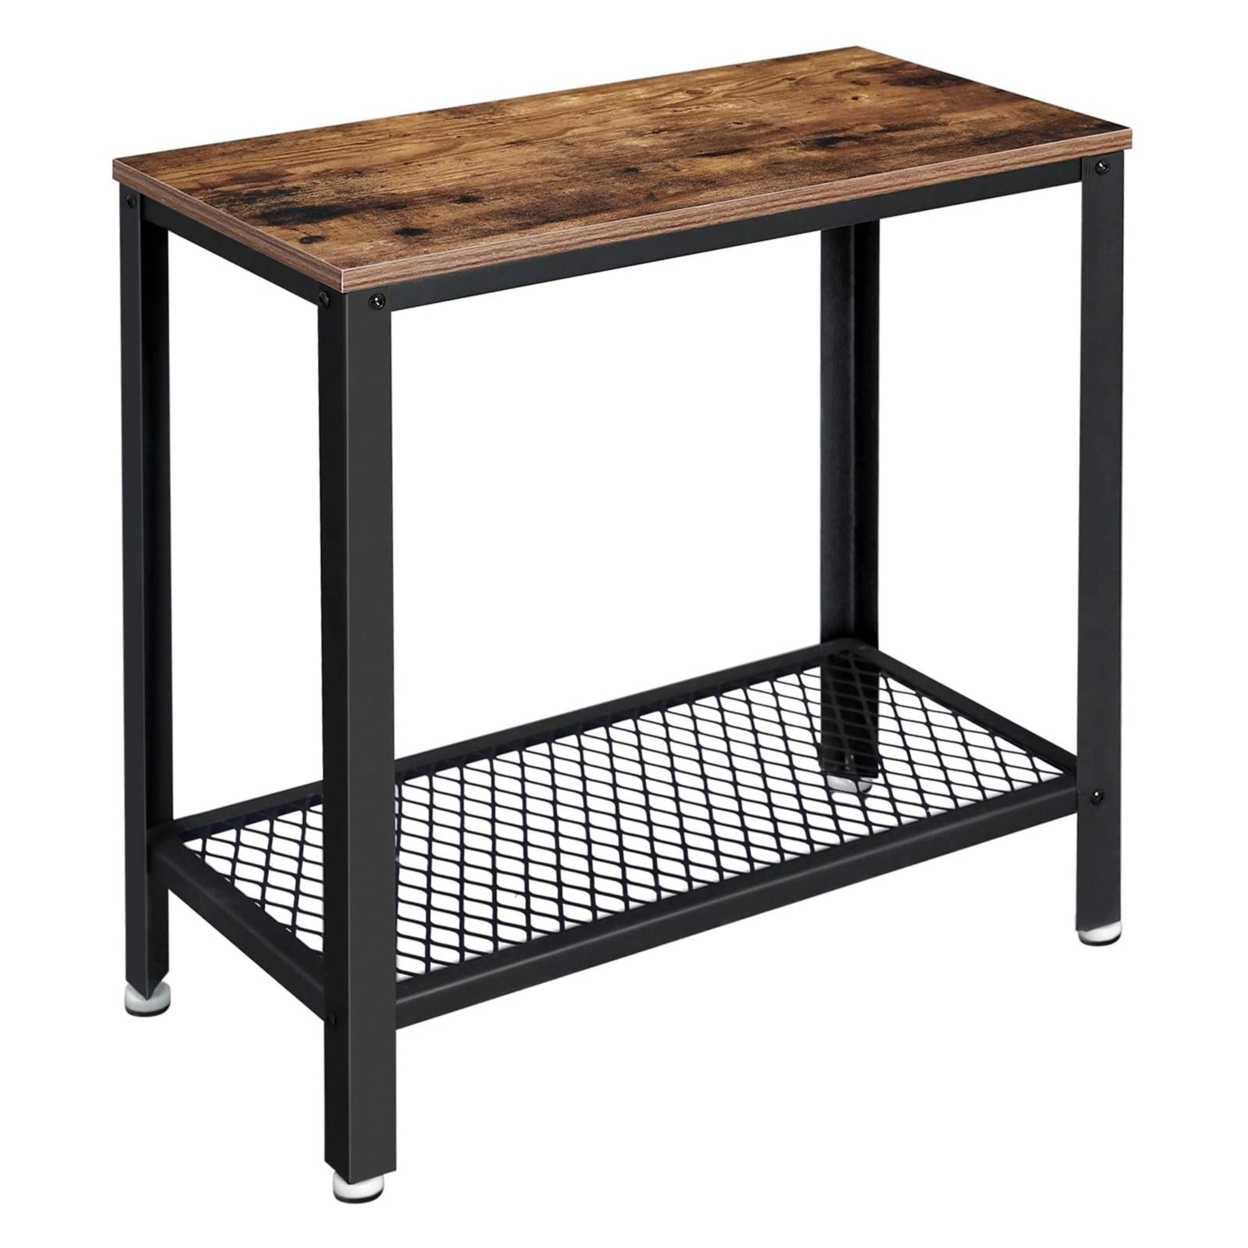 Wooden Top Side Table With 1 Mesh Metal Shelf, Brown And Black- Saltoro Sherpi